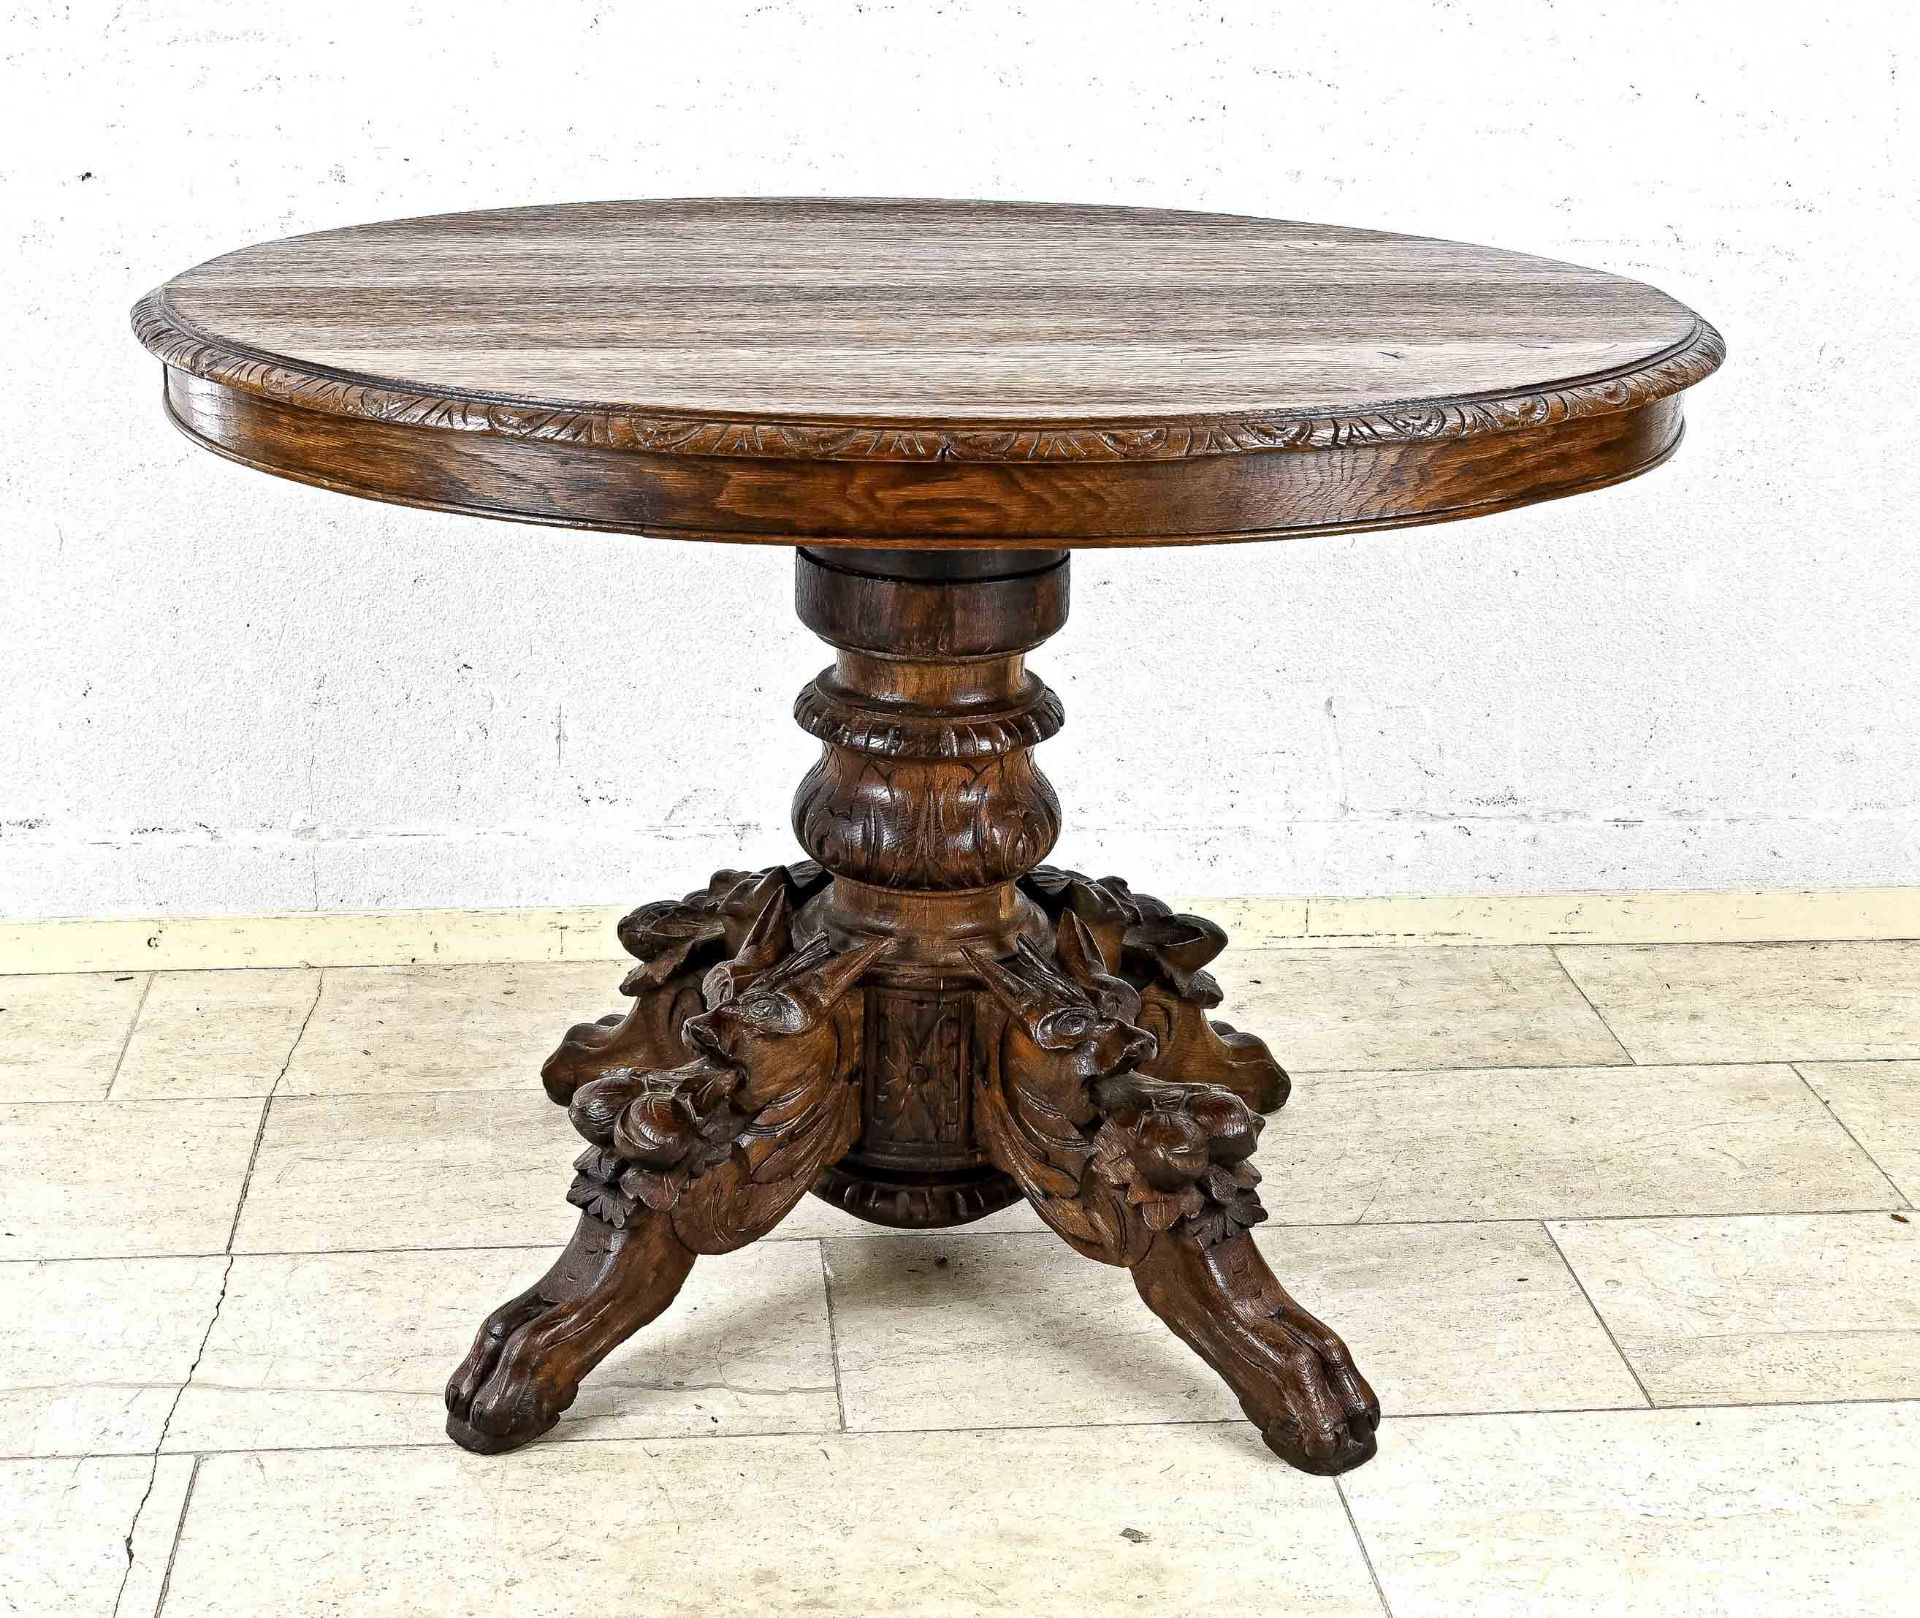 Table, France circa 1880, solid oak, base with carved fox heads, 79 x 104 x 116 cm - The furniture